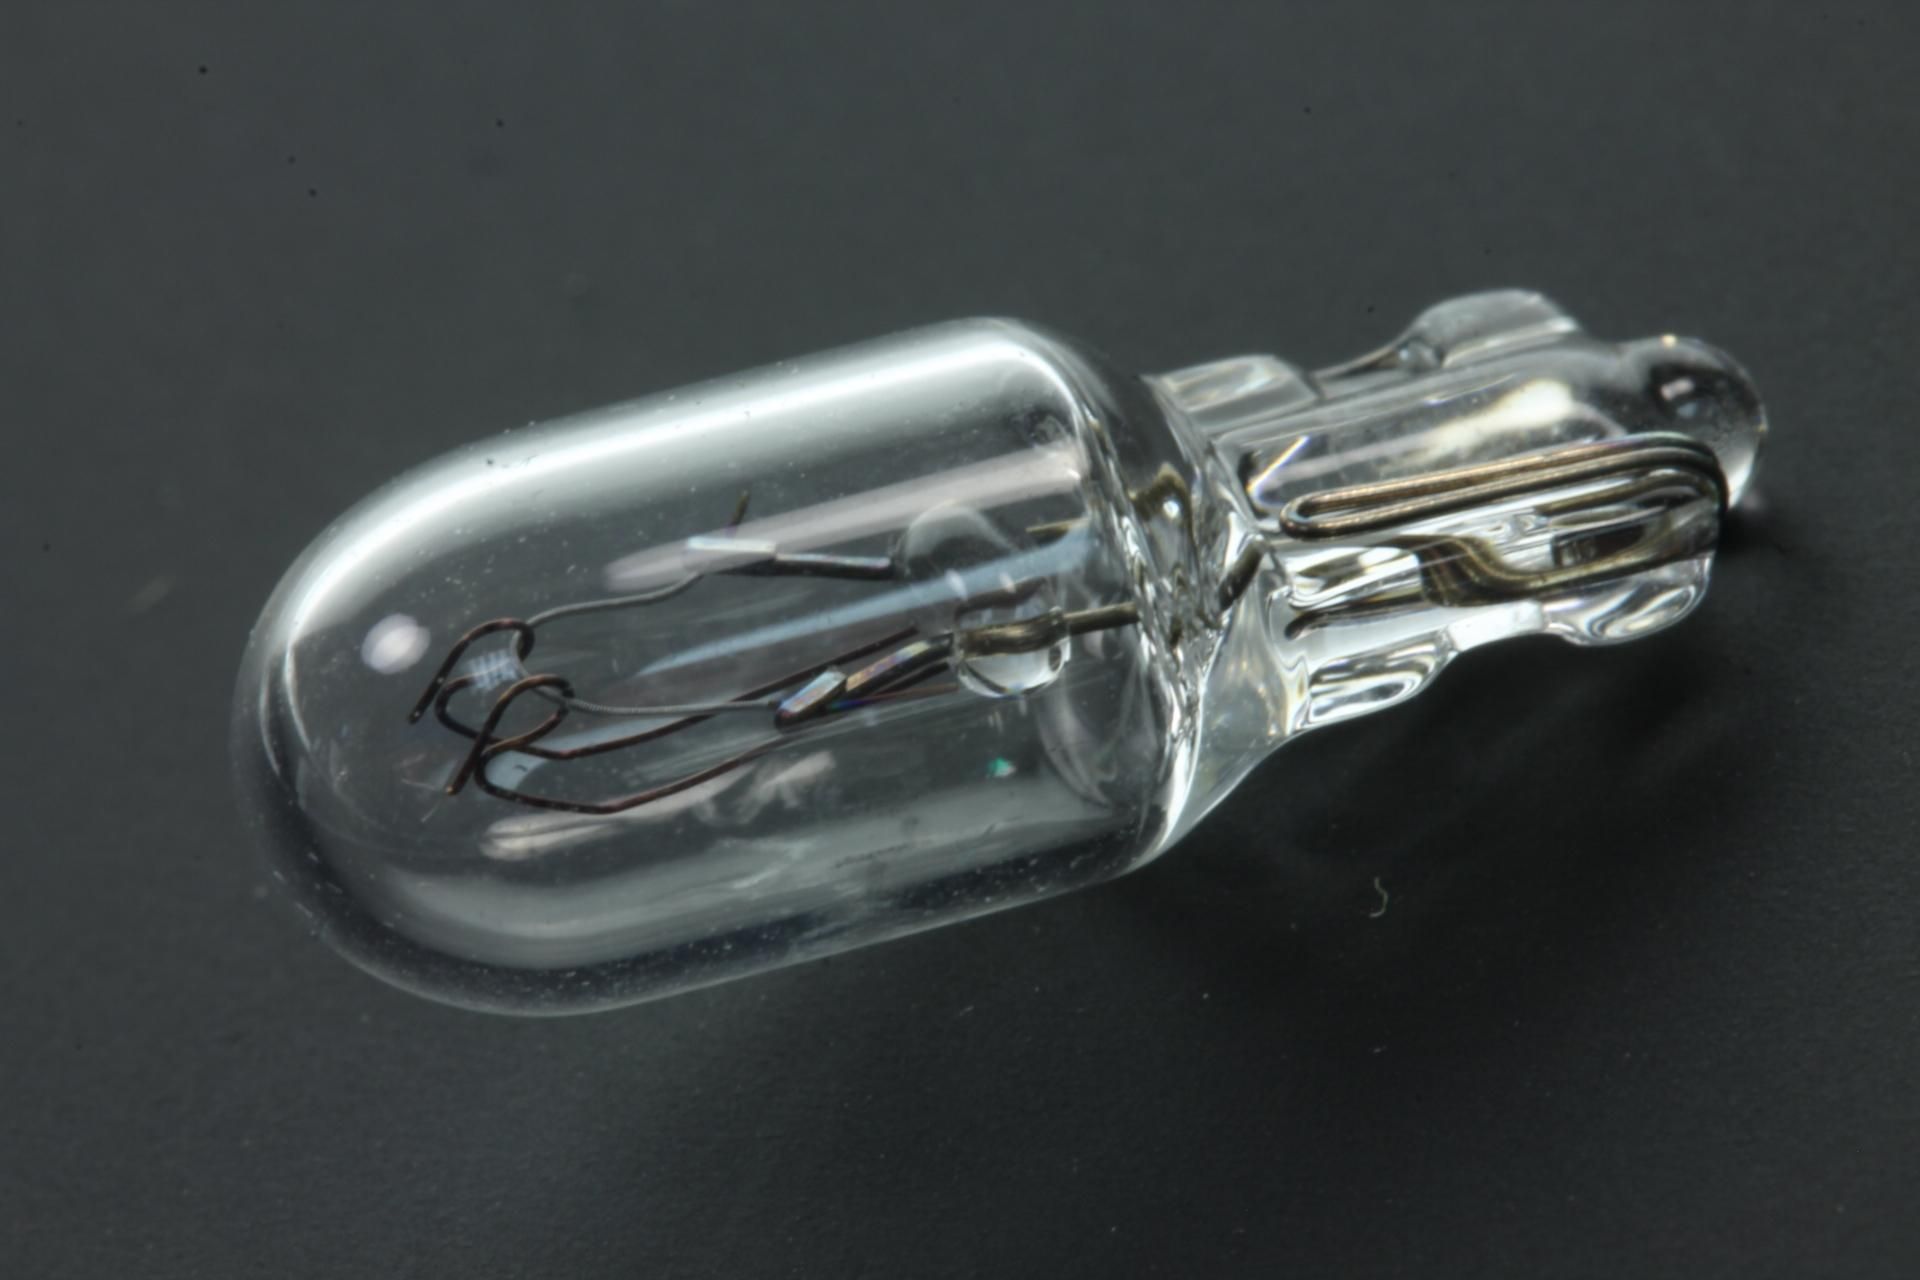 5GH-83516-00-00 Superseded by 3FV-83517-00-00 - BULB 12V-1.7W